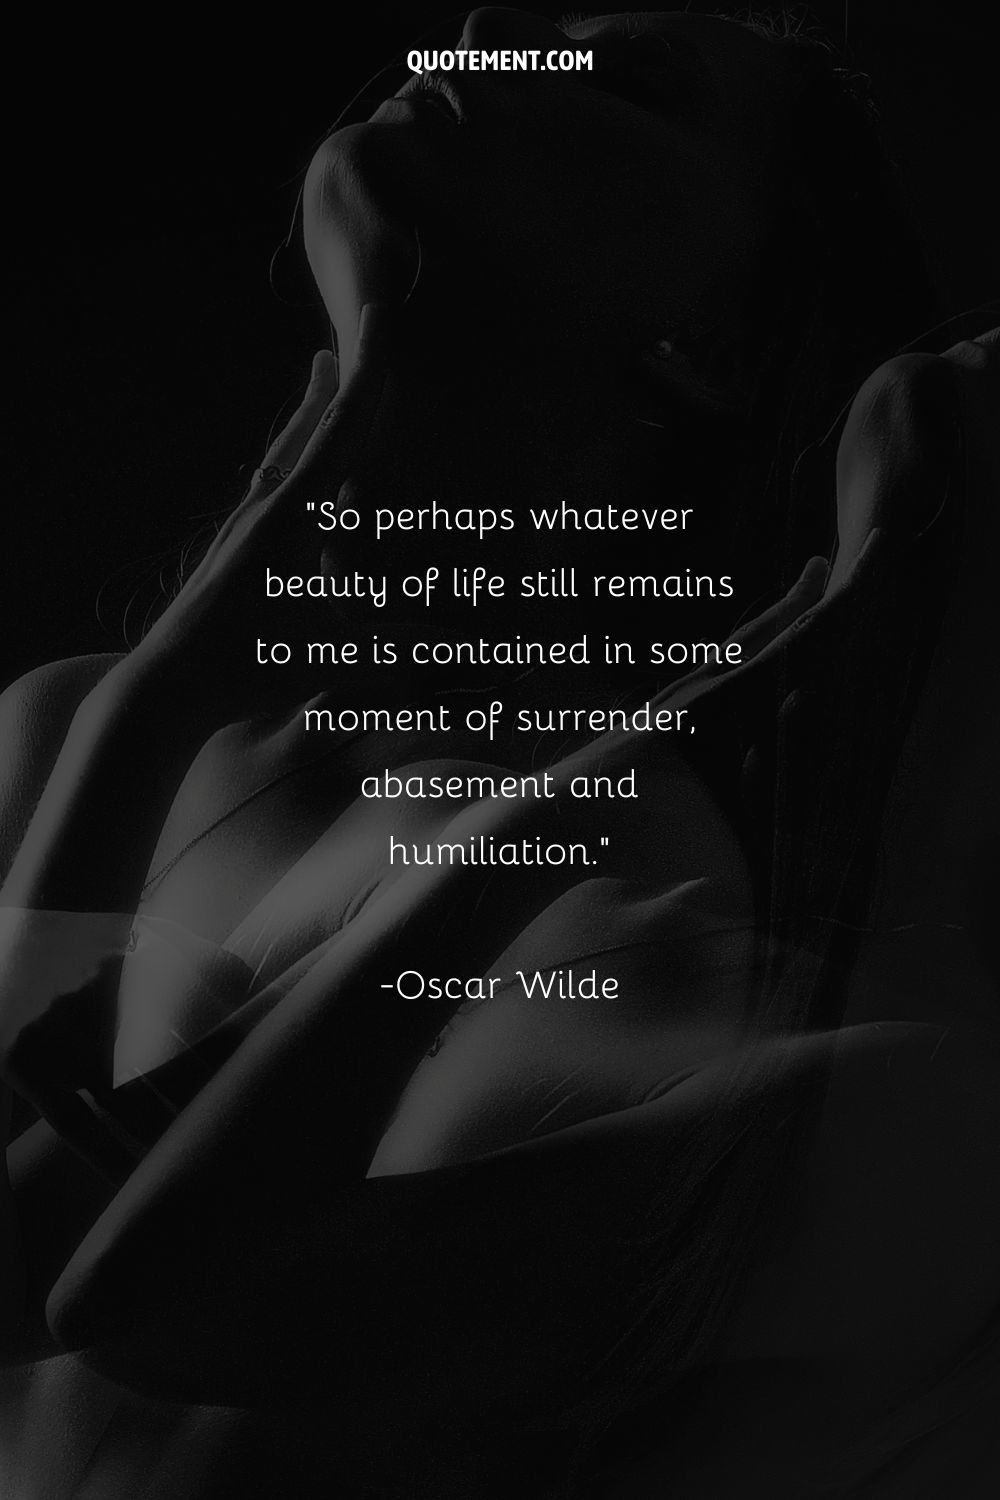 a woman in ecstasy representing a quote by Oscar Wilde